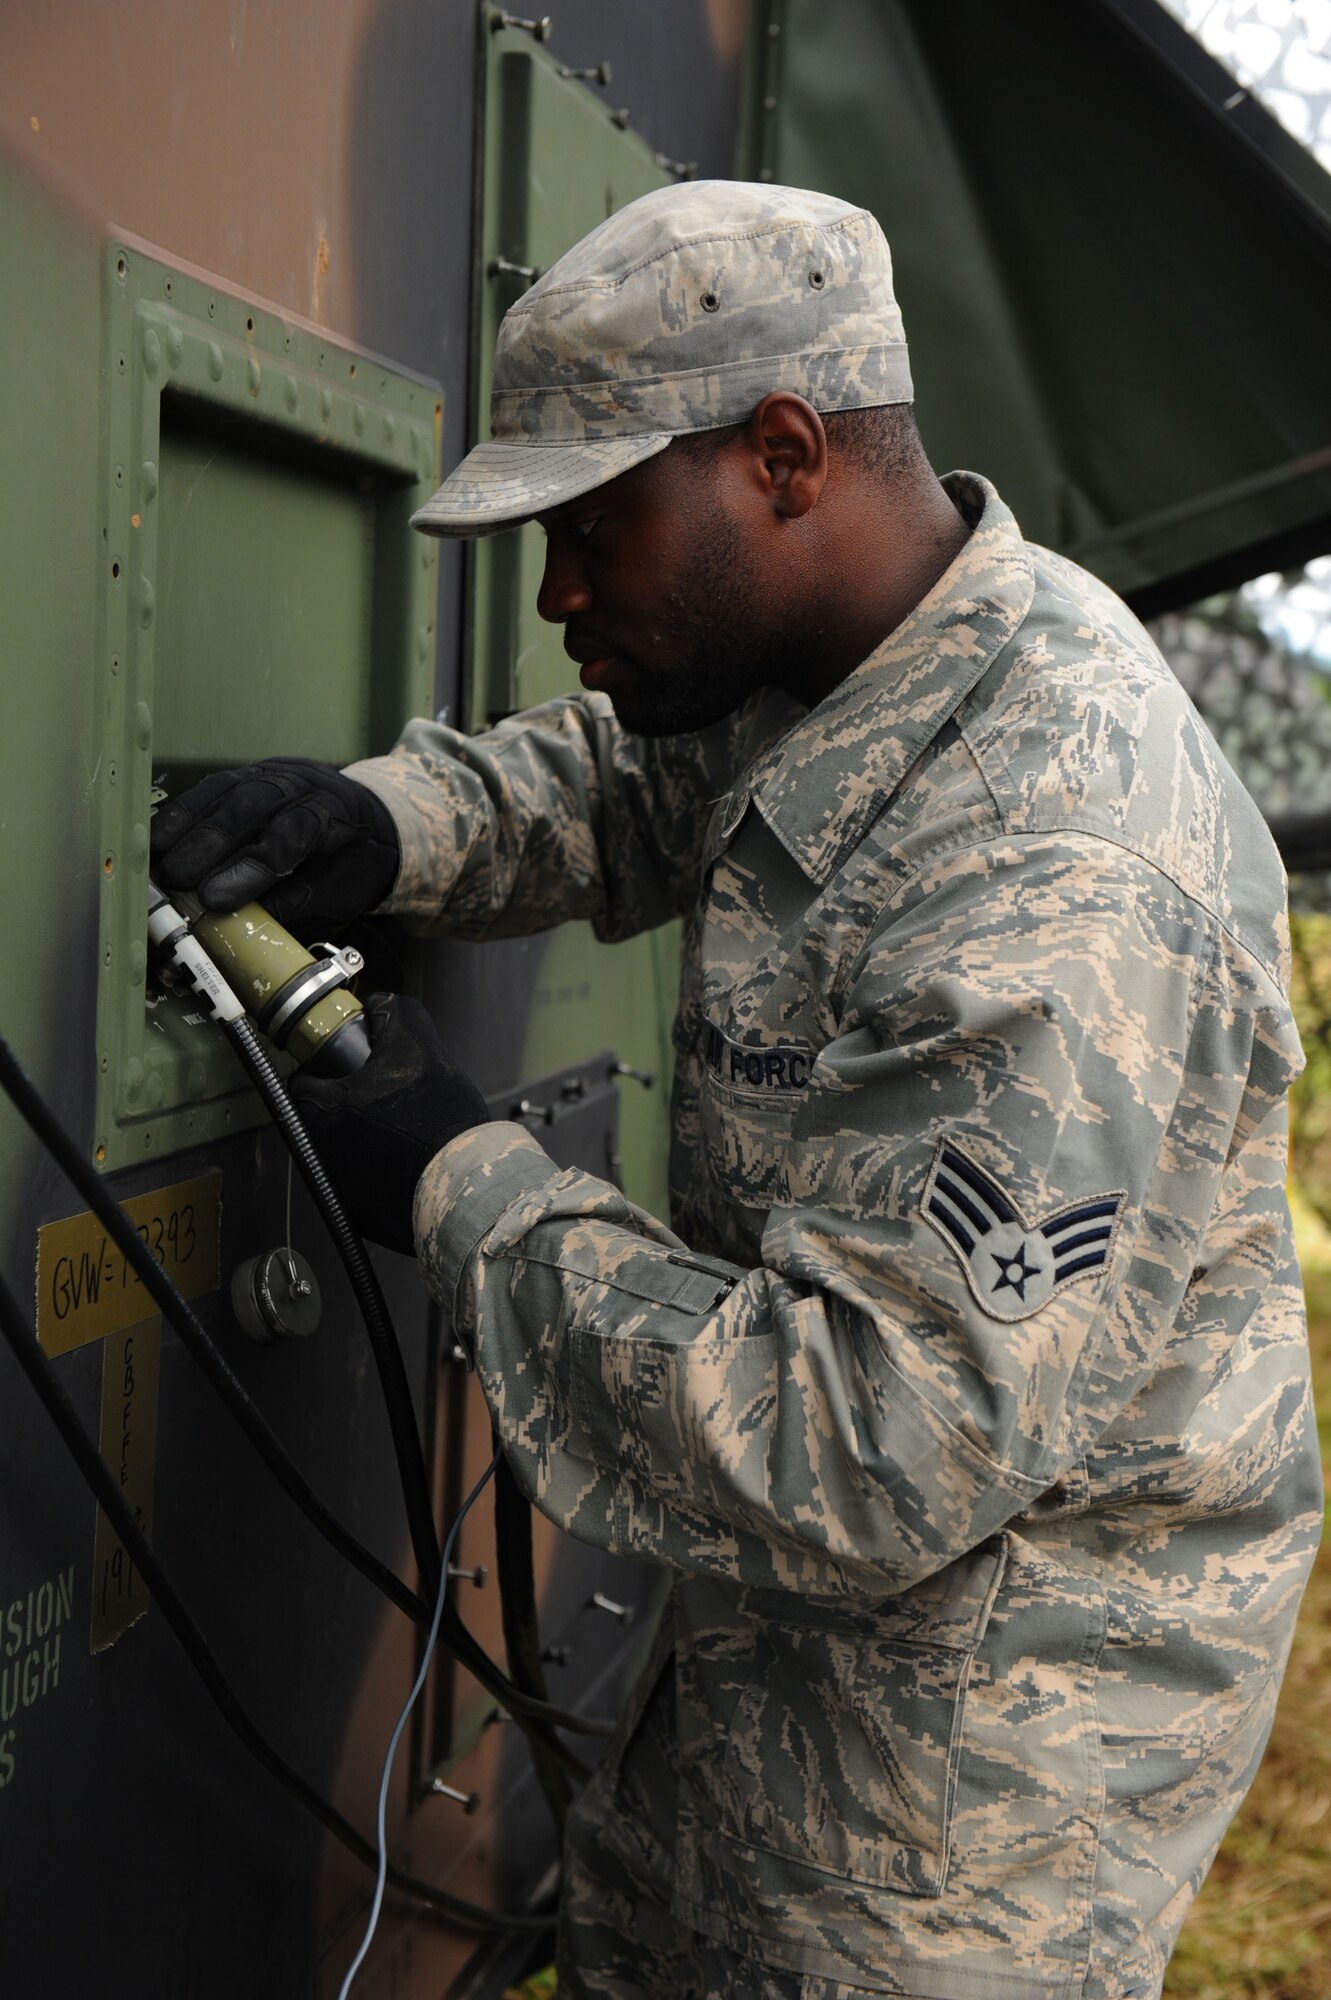 GEROLSTEIN, Germany – Senior Airman Joshua Harvey, 606th Air Control Squadron ground radar maintenance technician, connects a power cable to a radar shelter for Eifel Strike 2012 here July 16.  Eifel Strike is an annual field training exercise during which Airmen build a controlled radar site as well as a control and reporting center to work and live out of for a week. Exercises like this are designed to give Spangdahlem Airmen the practice, skills and experience they need to deploy efficiently and effectively within a moment’s notice in support of contingency operations around the world. (U.S. Air Force photo by Airman 1st Class Gustavo Castillo/Released)